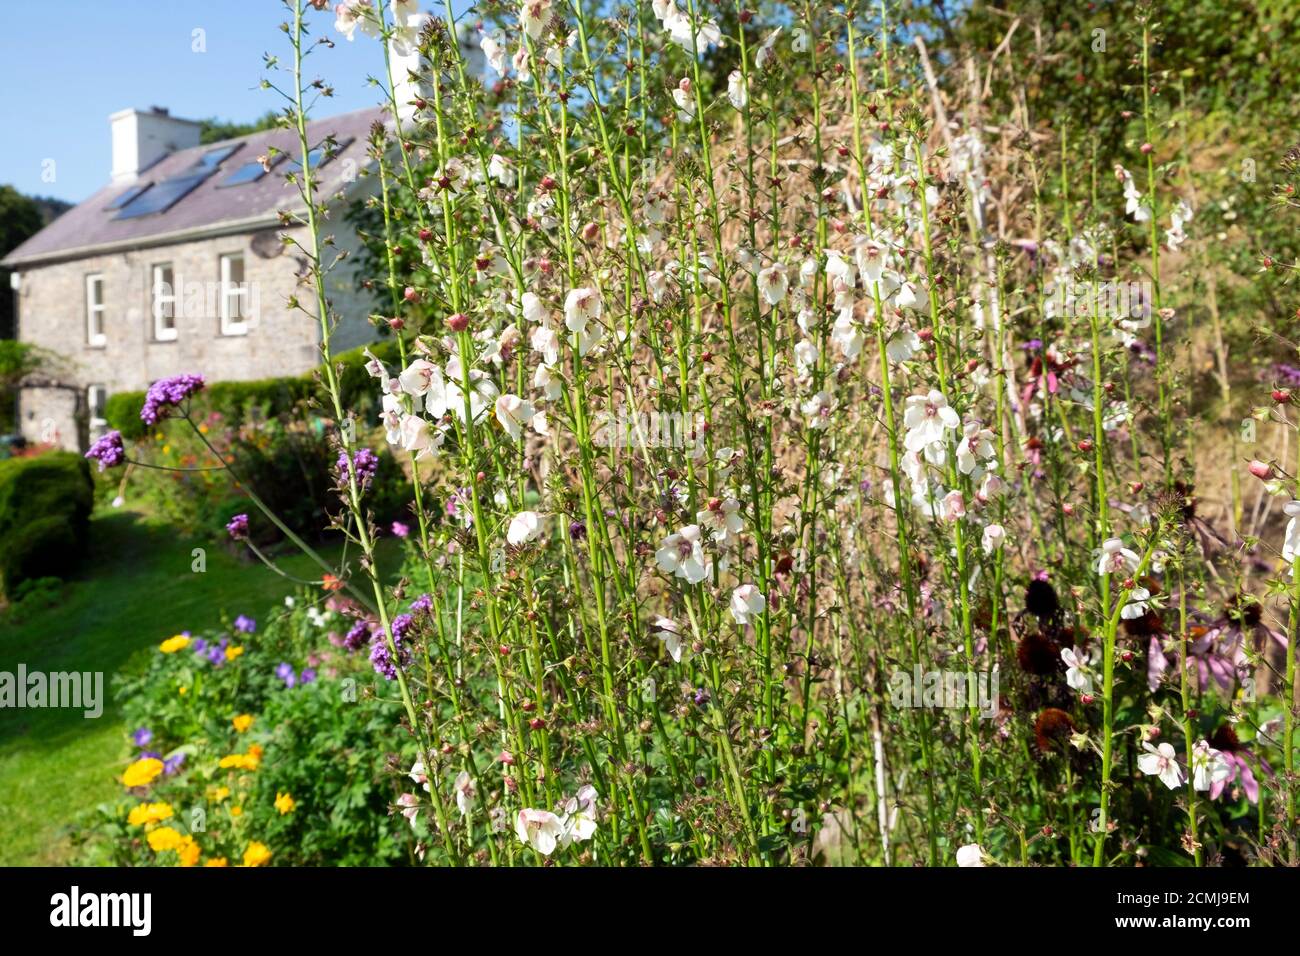 White Verbascum tall bee loving plants blooming in the cottage garden of a stone house country home in Carmarthenshire West Wales UK  KATHY DEWITT Stock Photo